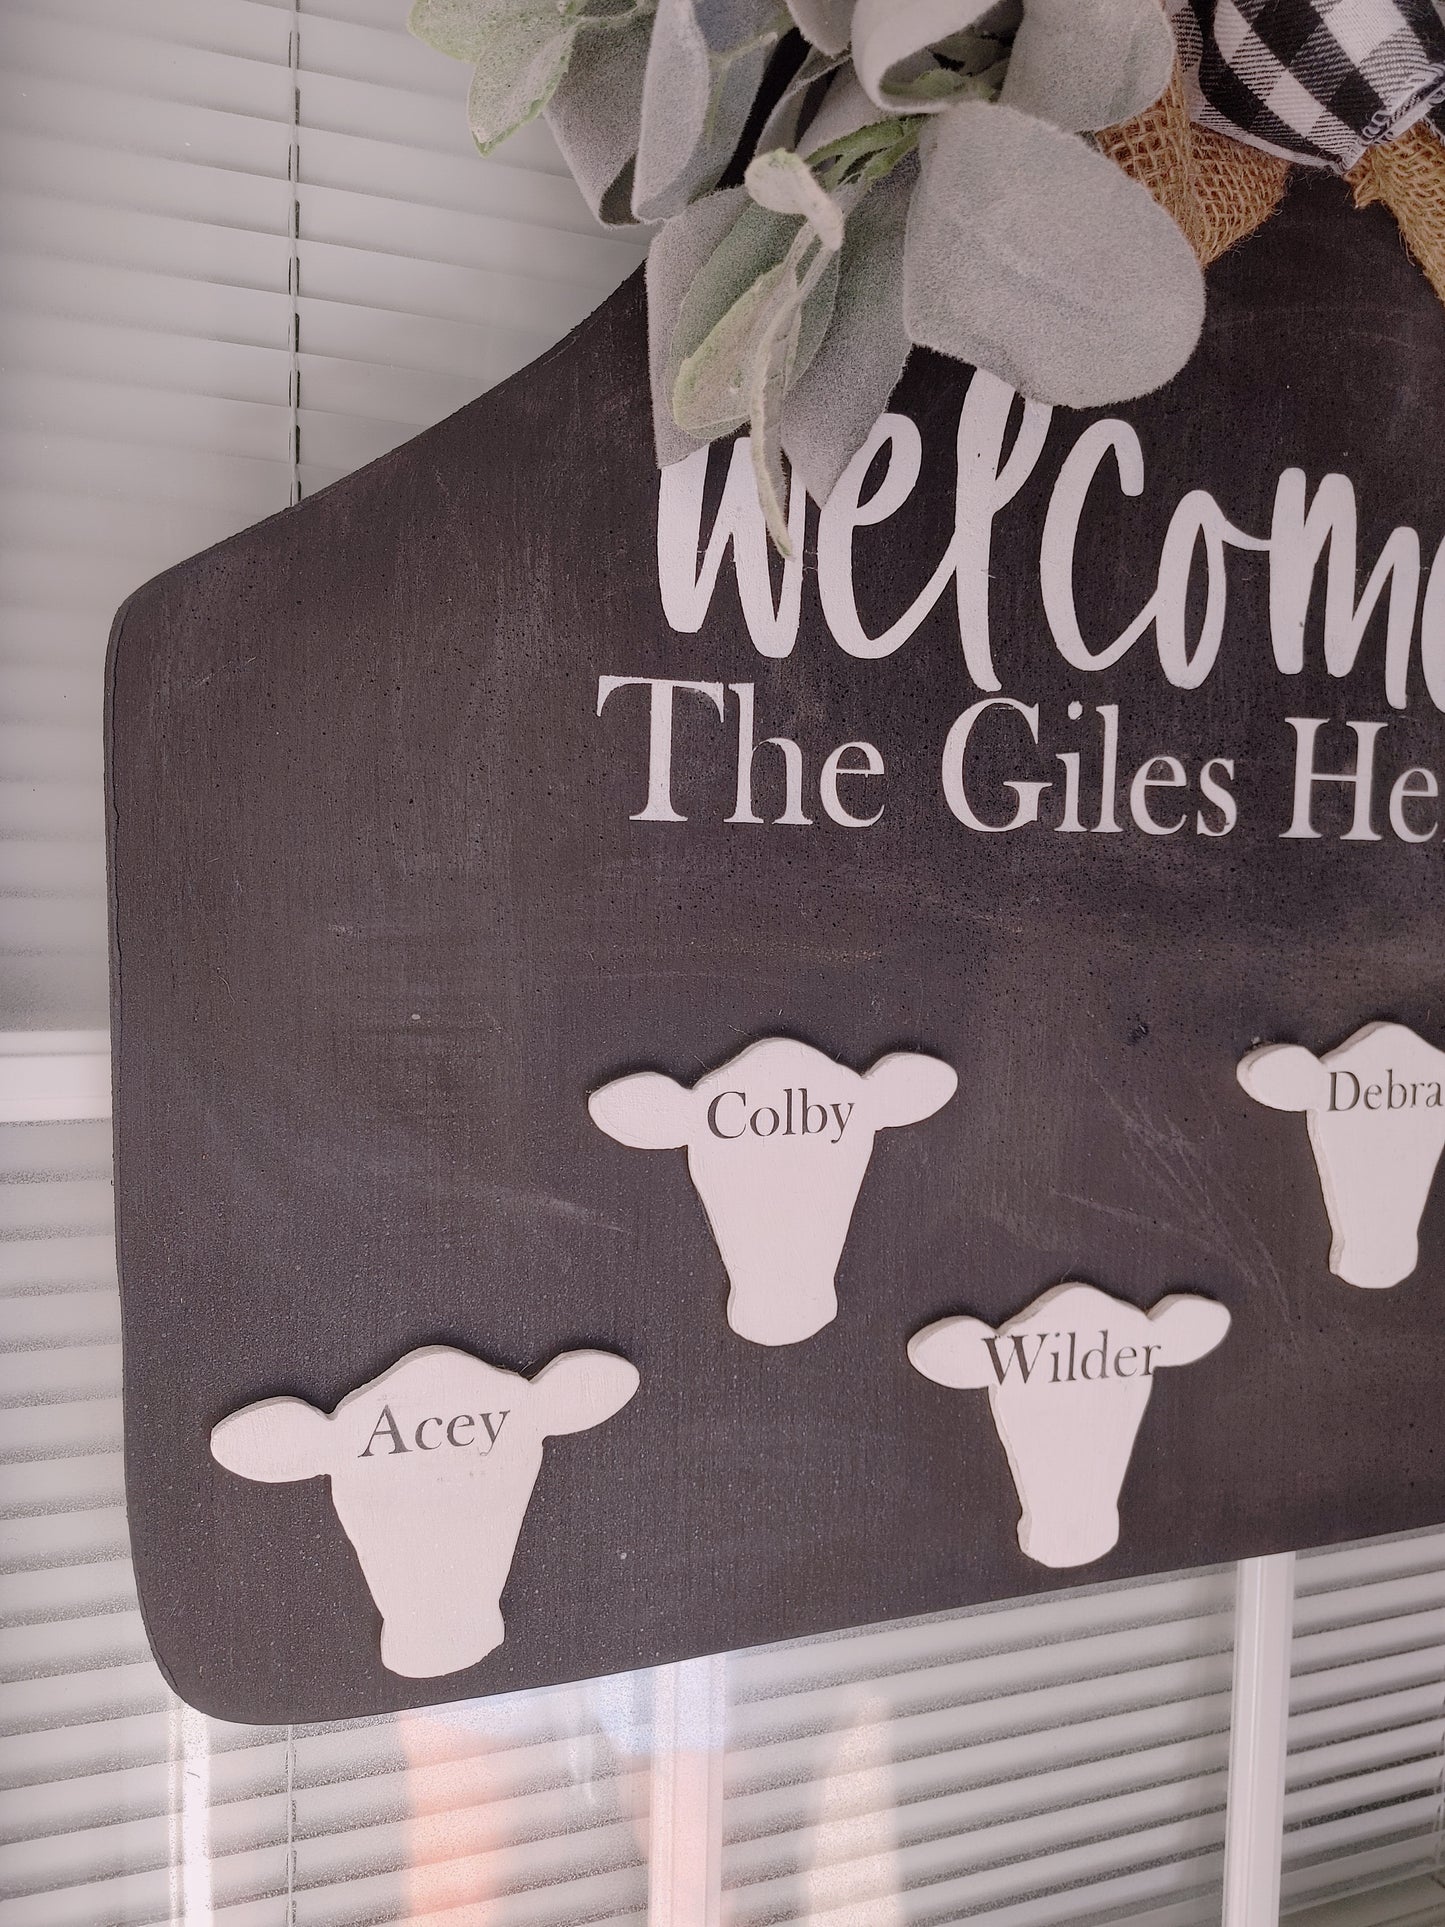 XL Tag Hanger with Personalized Mini Cows